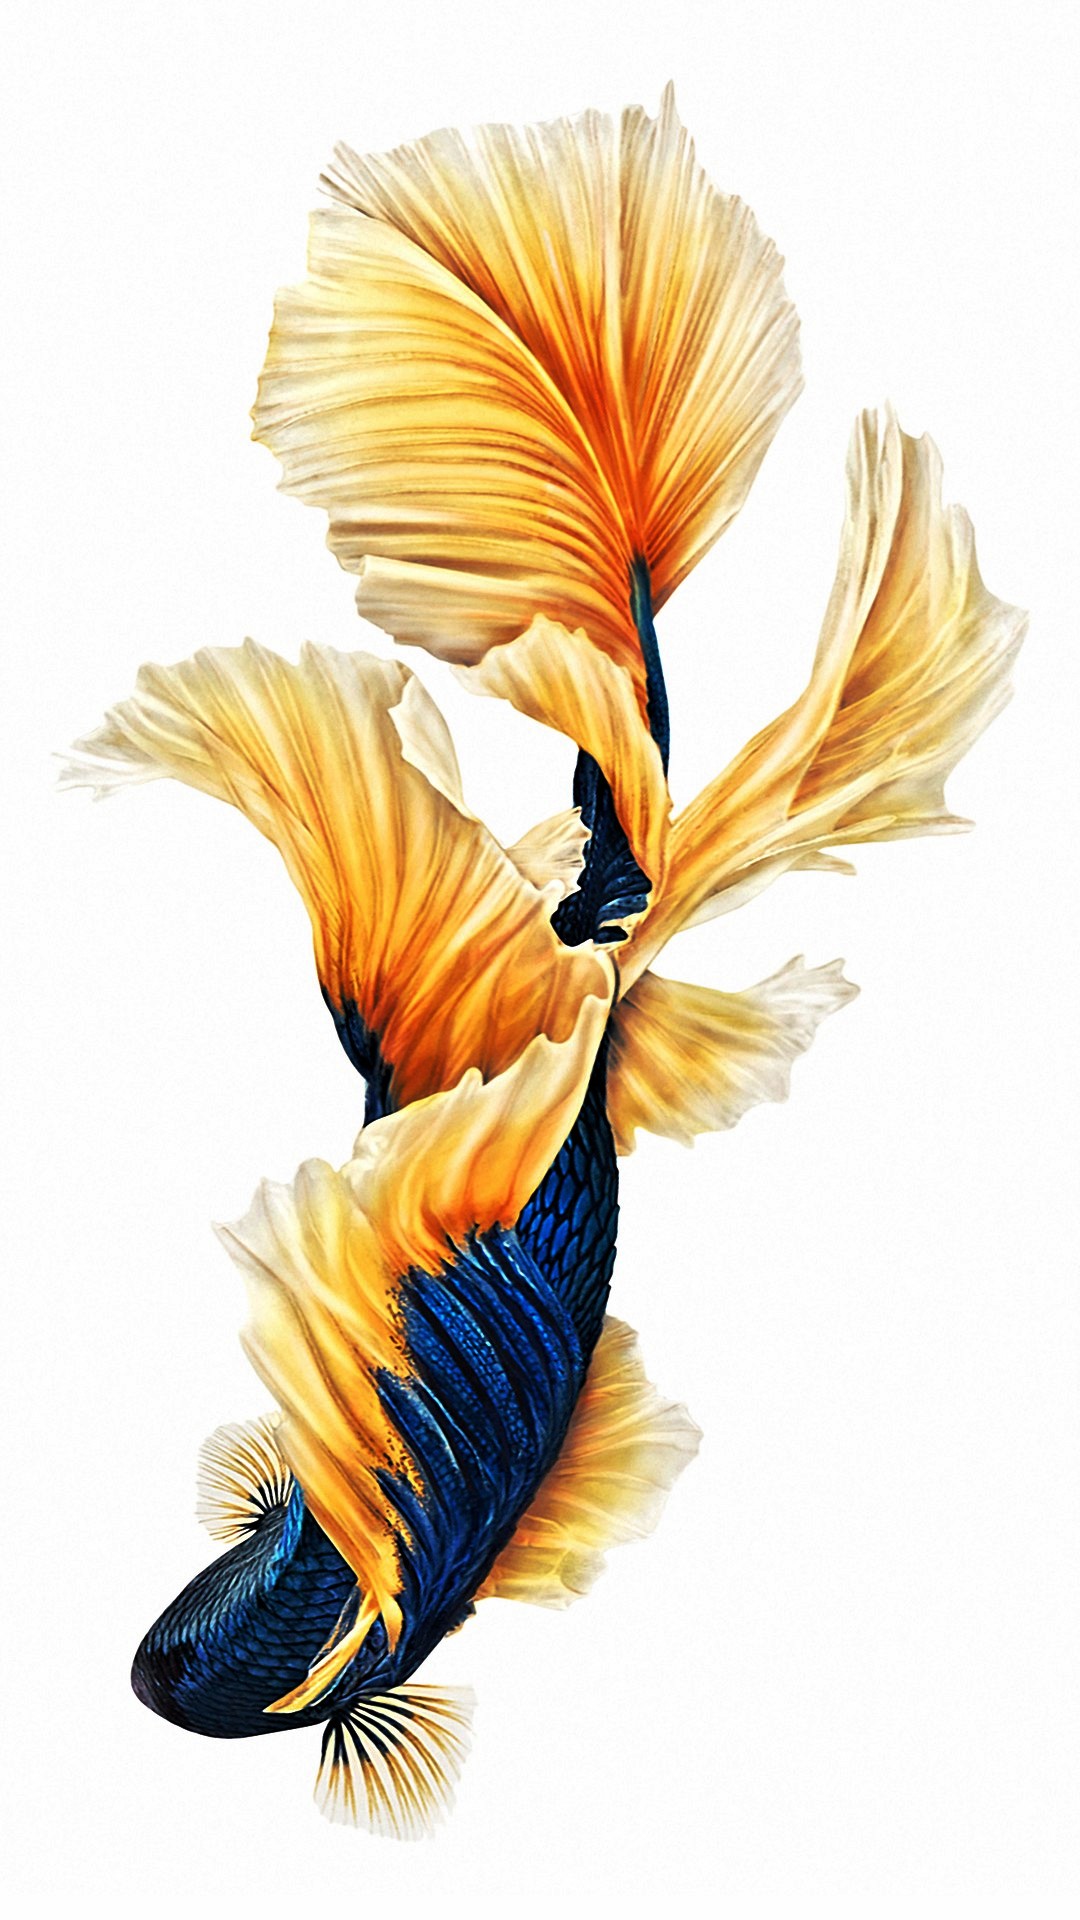 Iphone 6s Plus Wallpaper Hd With High-resolution Pixel - Iphone Fish  Wallpaper Hd - 1080x1920 Wallpaper 